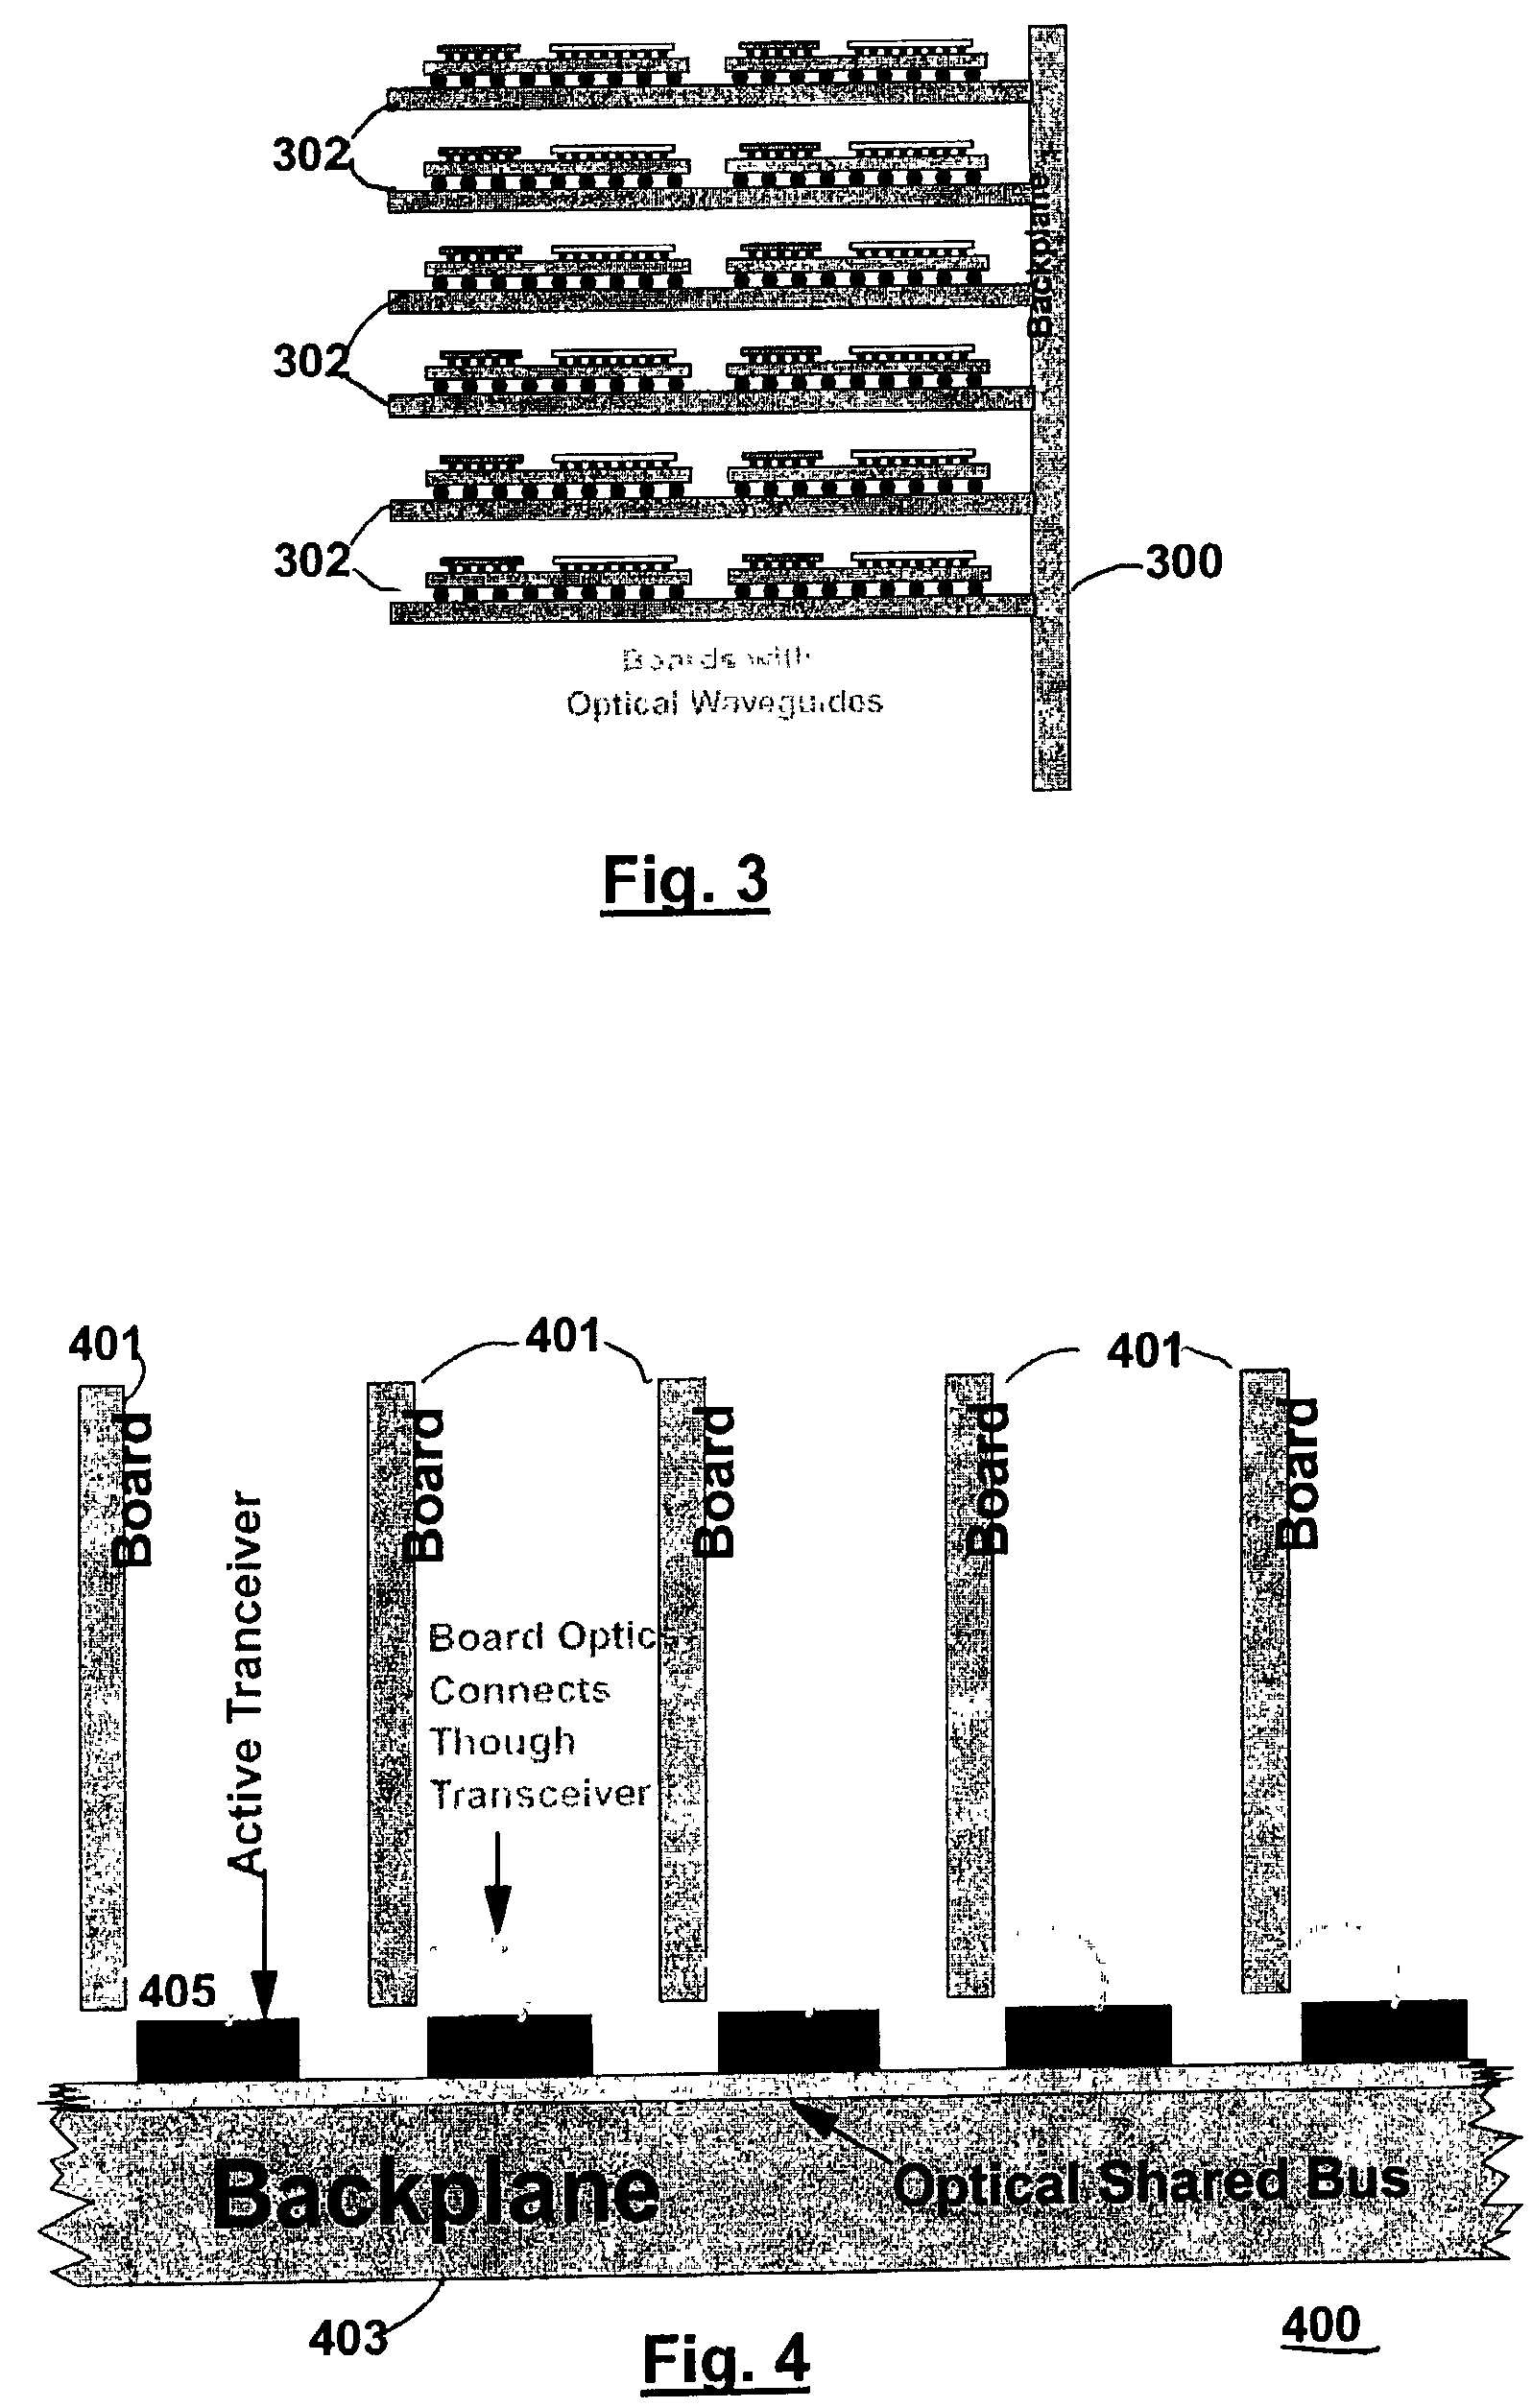 Backplane assembly with board to board optical interconnections and a method of continuity checking board connections